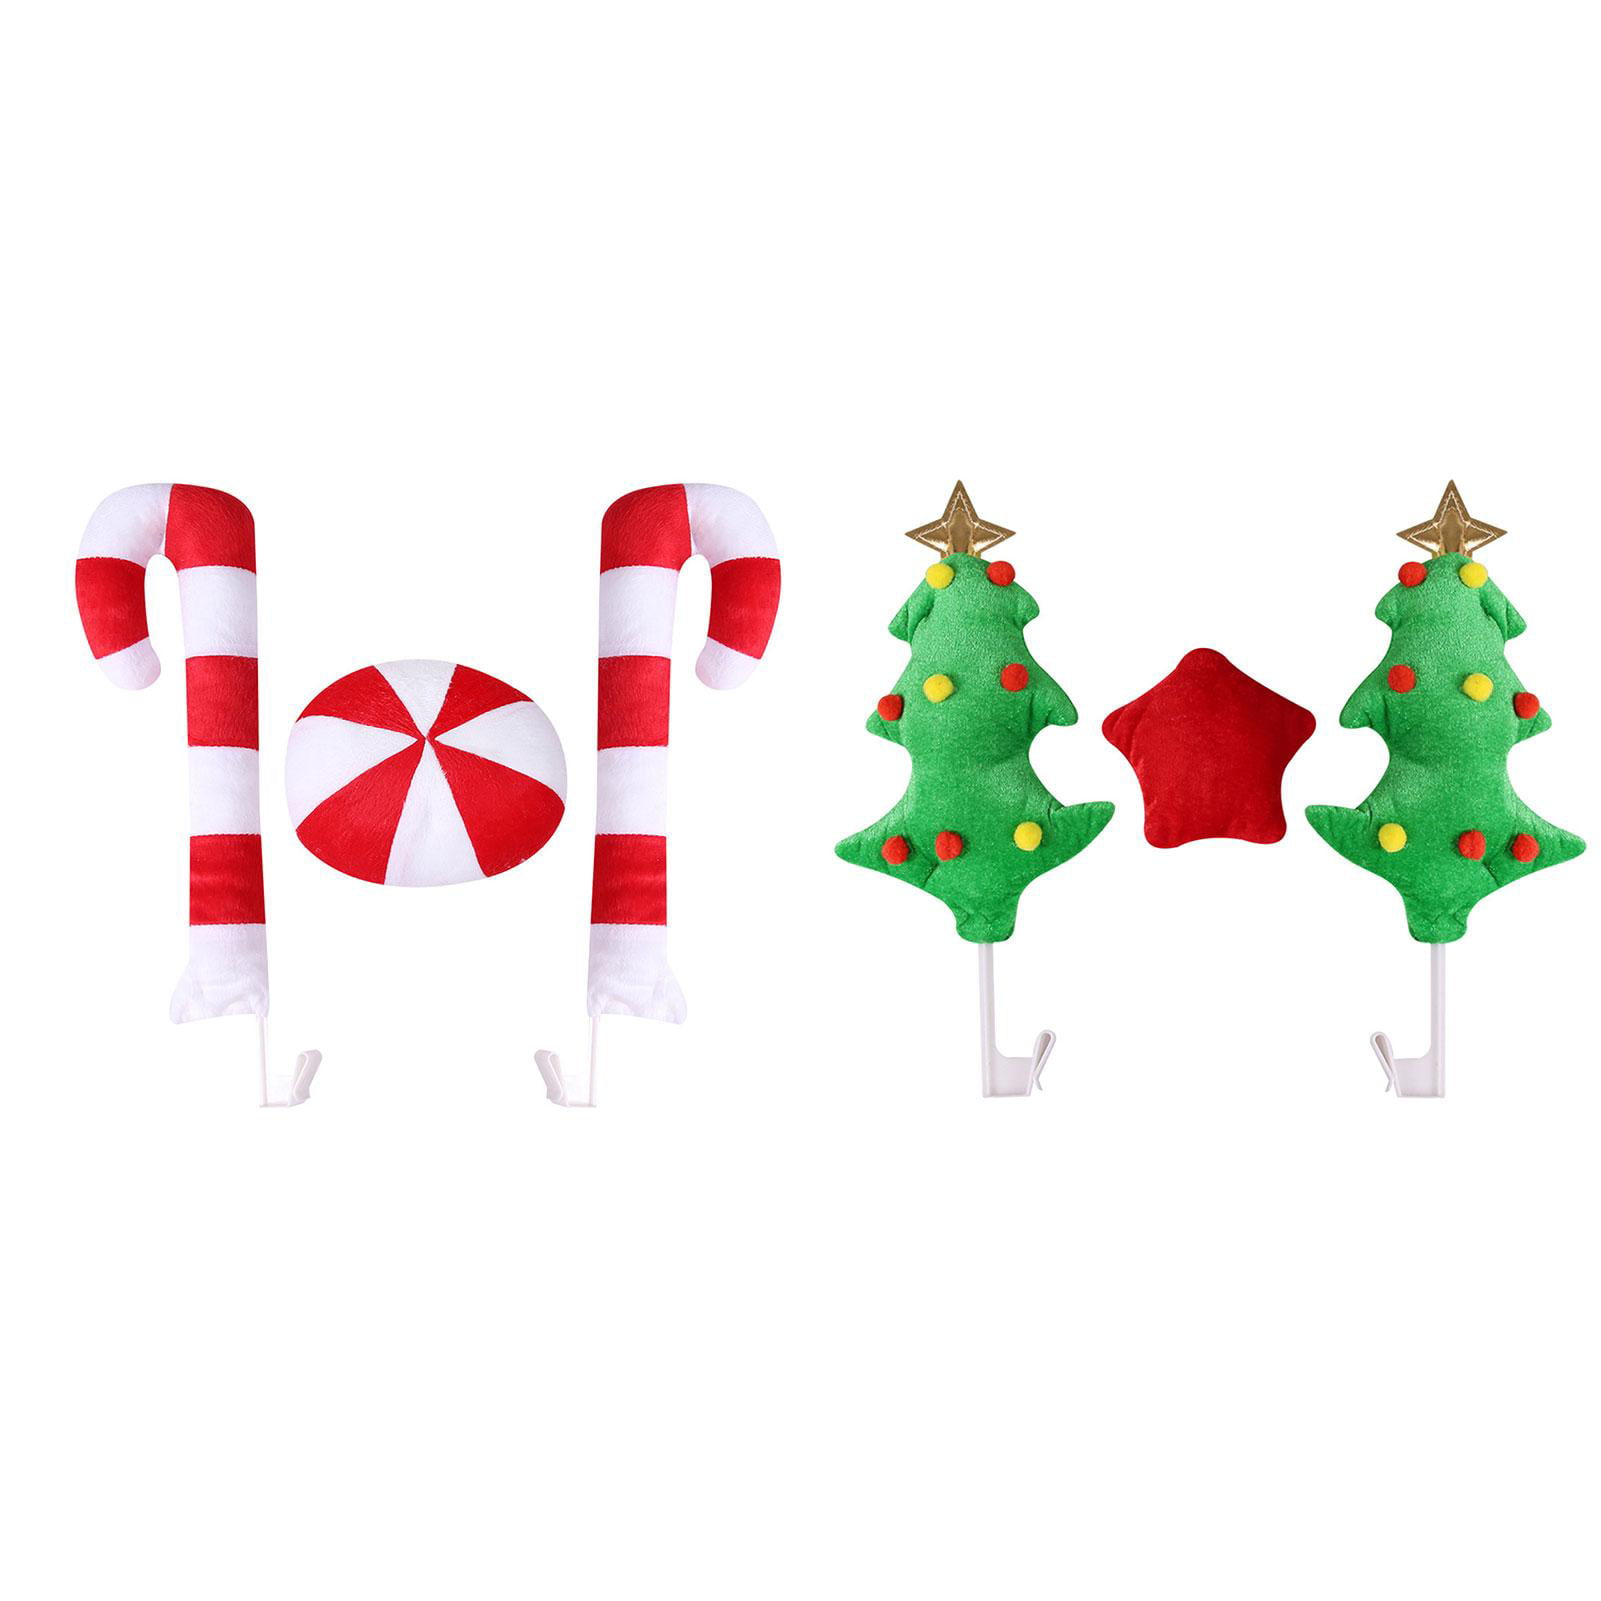 CHRISTMAS JUMPER WOODEN BUNTING-Red/White-Xmas Party Hanging Decoration-Garland 